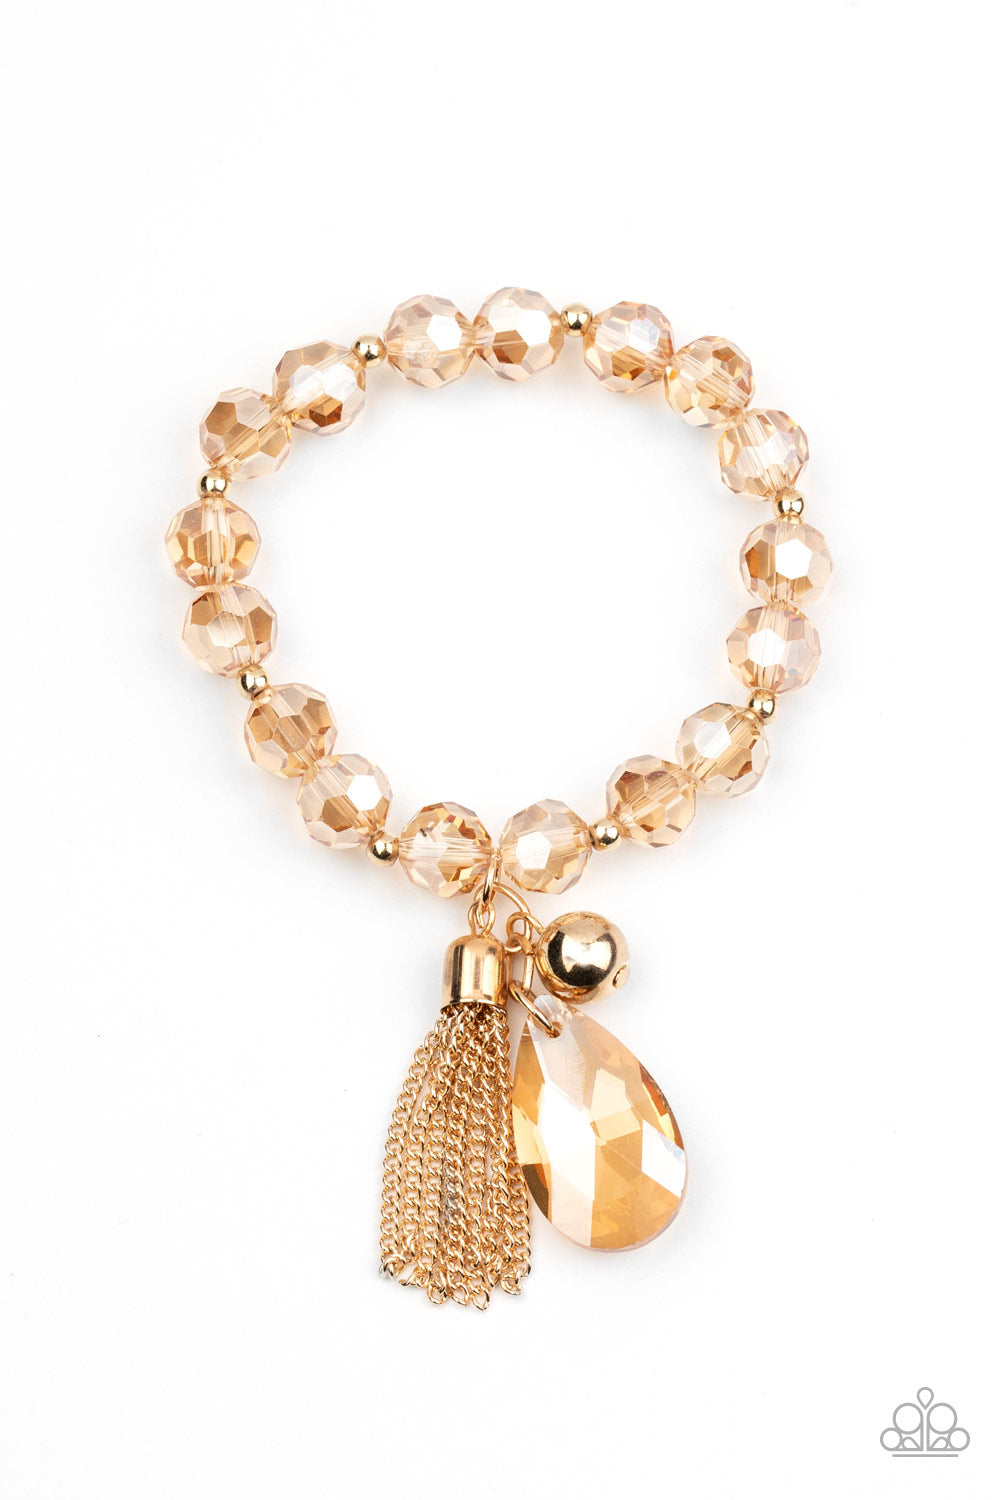 Leaving So SWOON? Gold Bracelet - Paparazzi Accessories